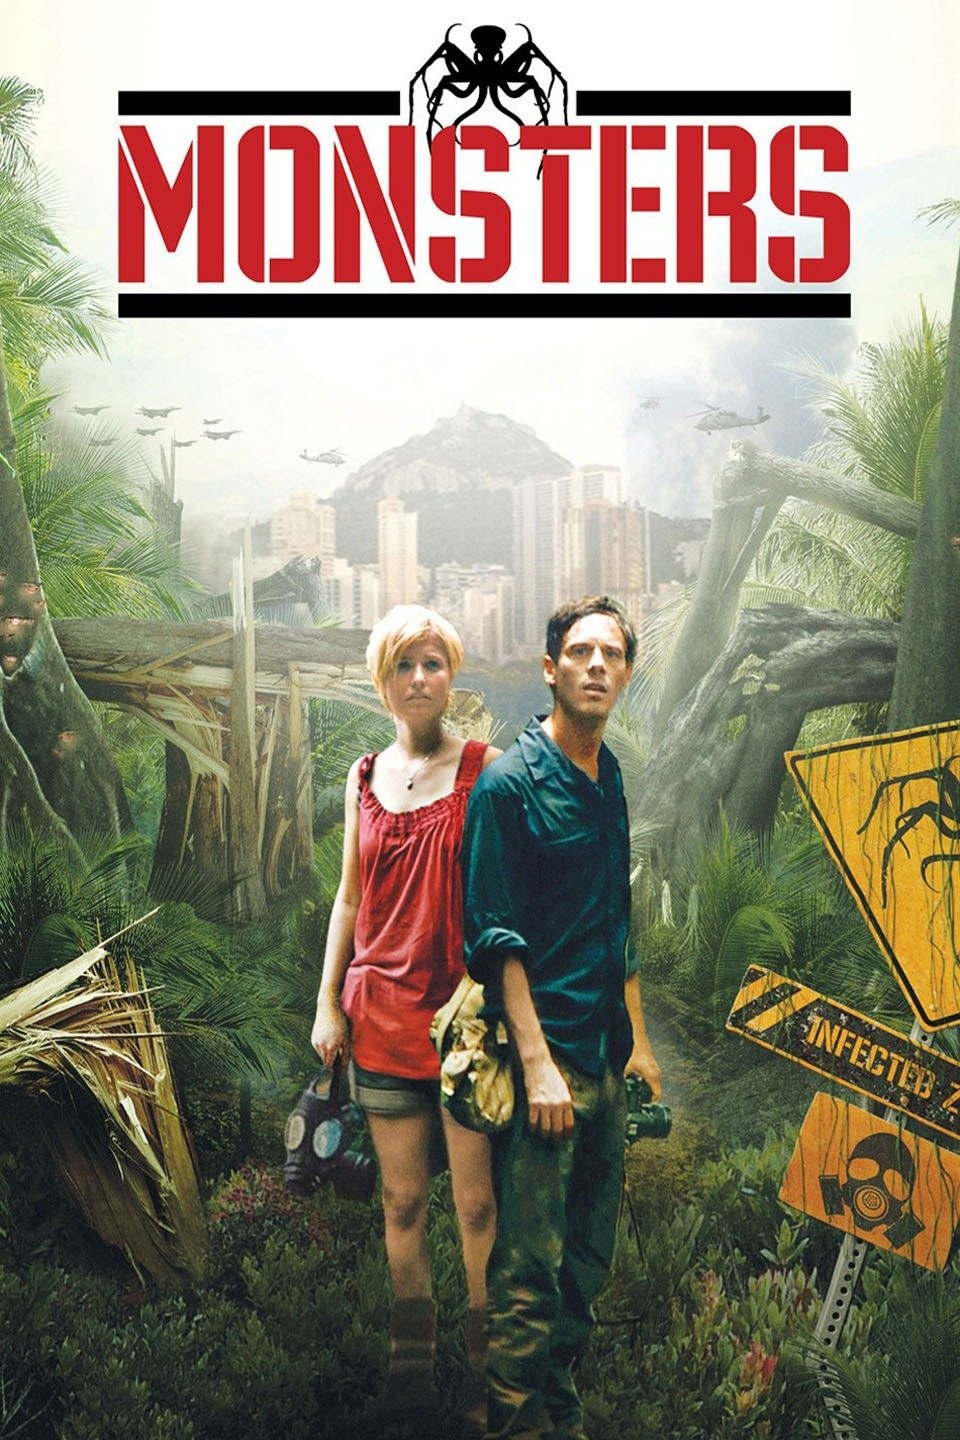 Monsters of California - Rotten Tomatoes